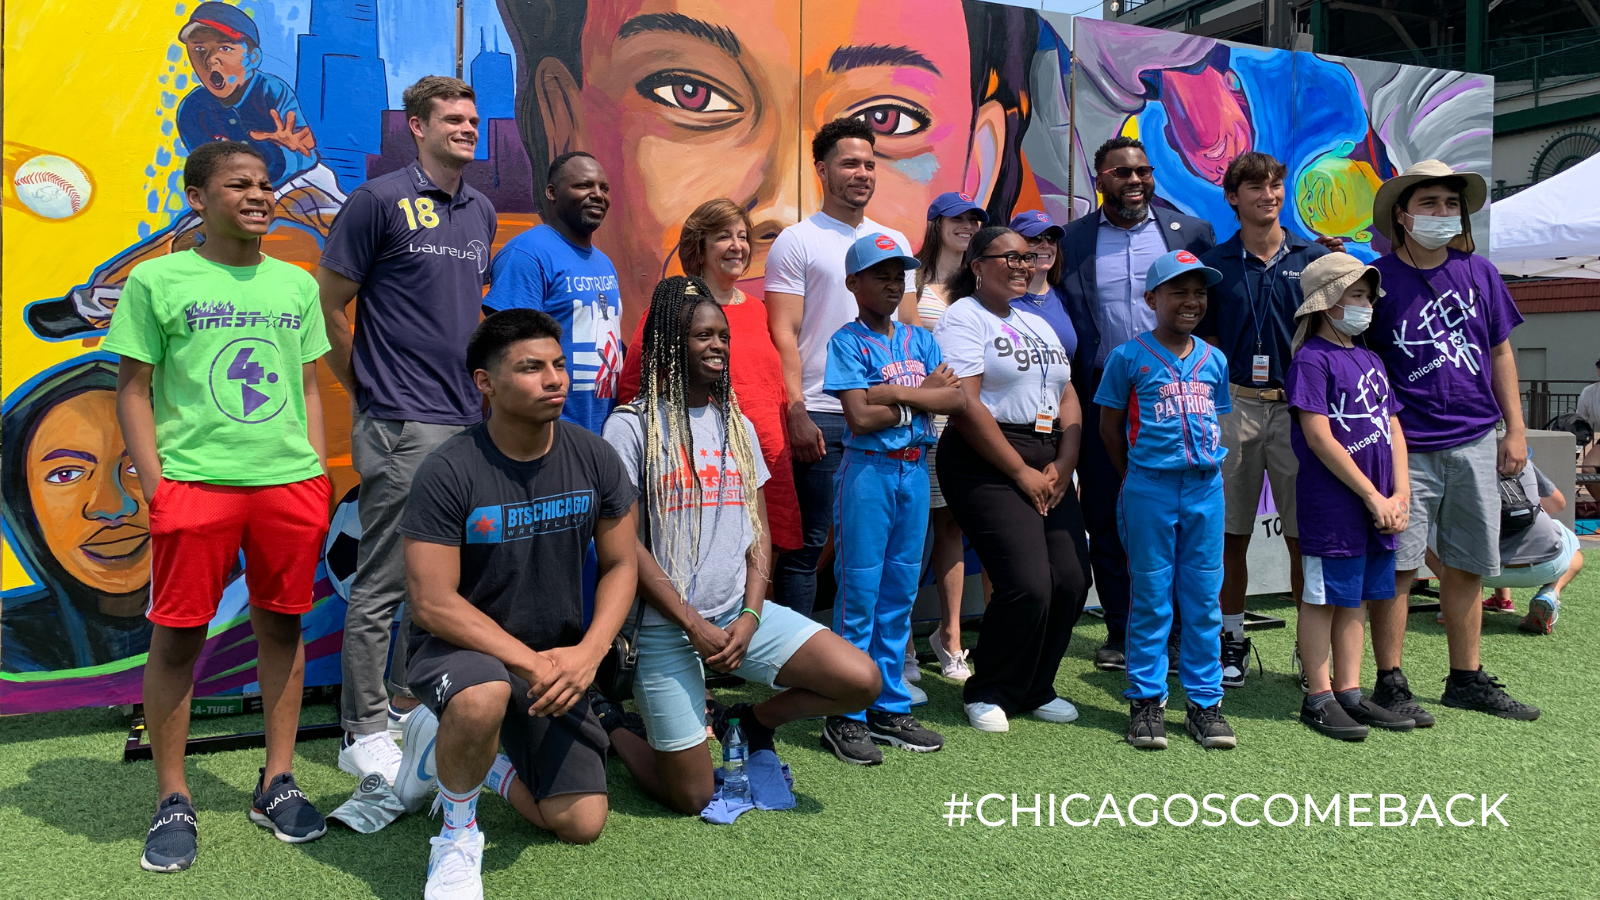 Boys & Girls Clubs of Chicago  Provides Chicago's children a safe,  positive and supportive place to participate in after-school programs.